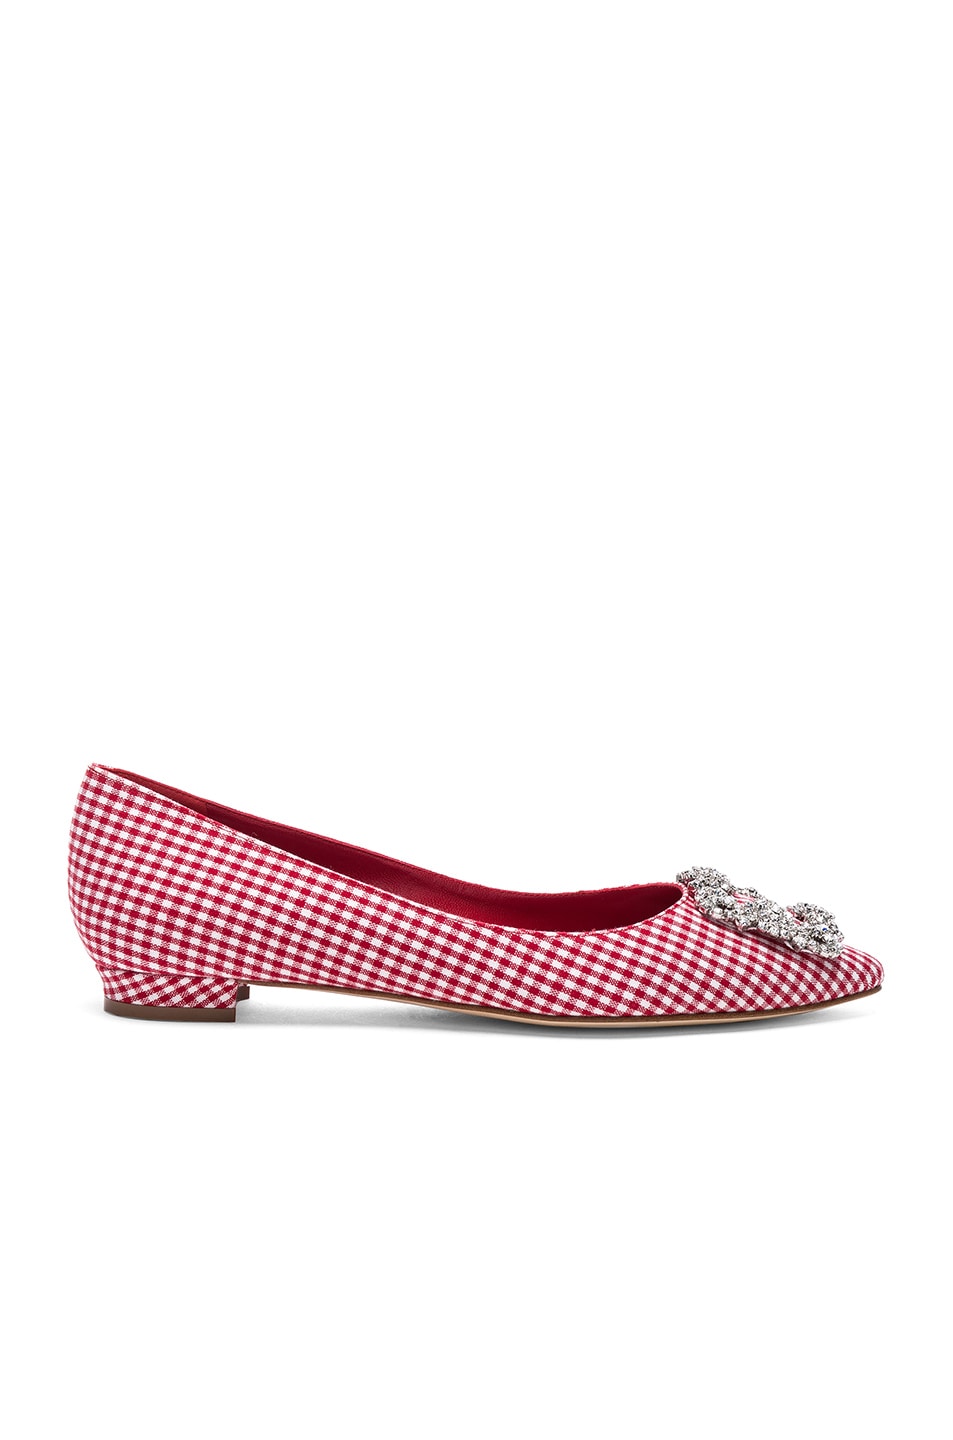 Image 1 of Manolo Blahnik Gingham Hangisi Flats in Red & White Gingham